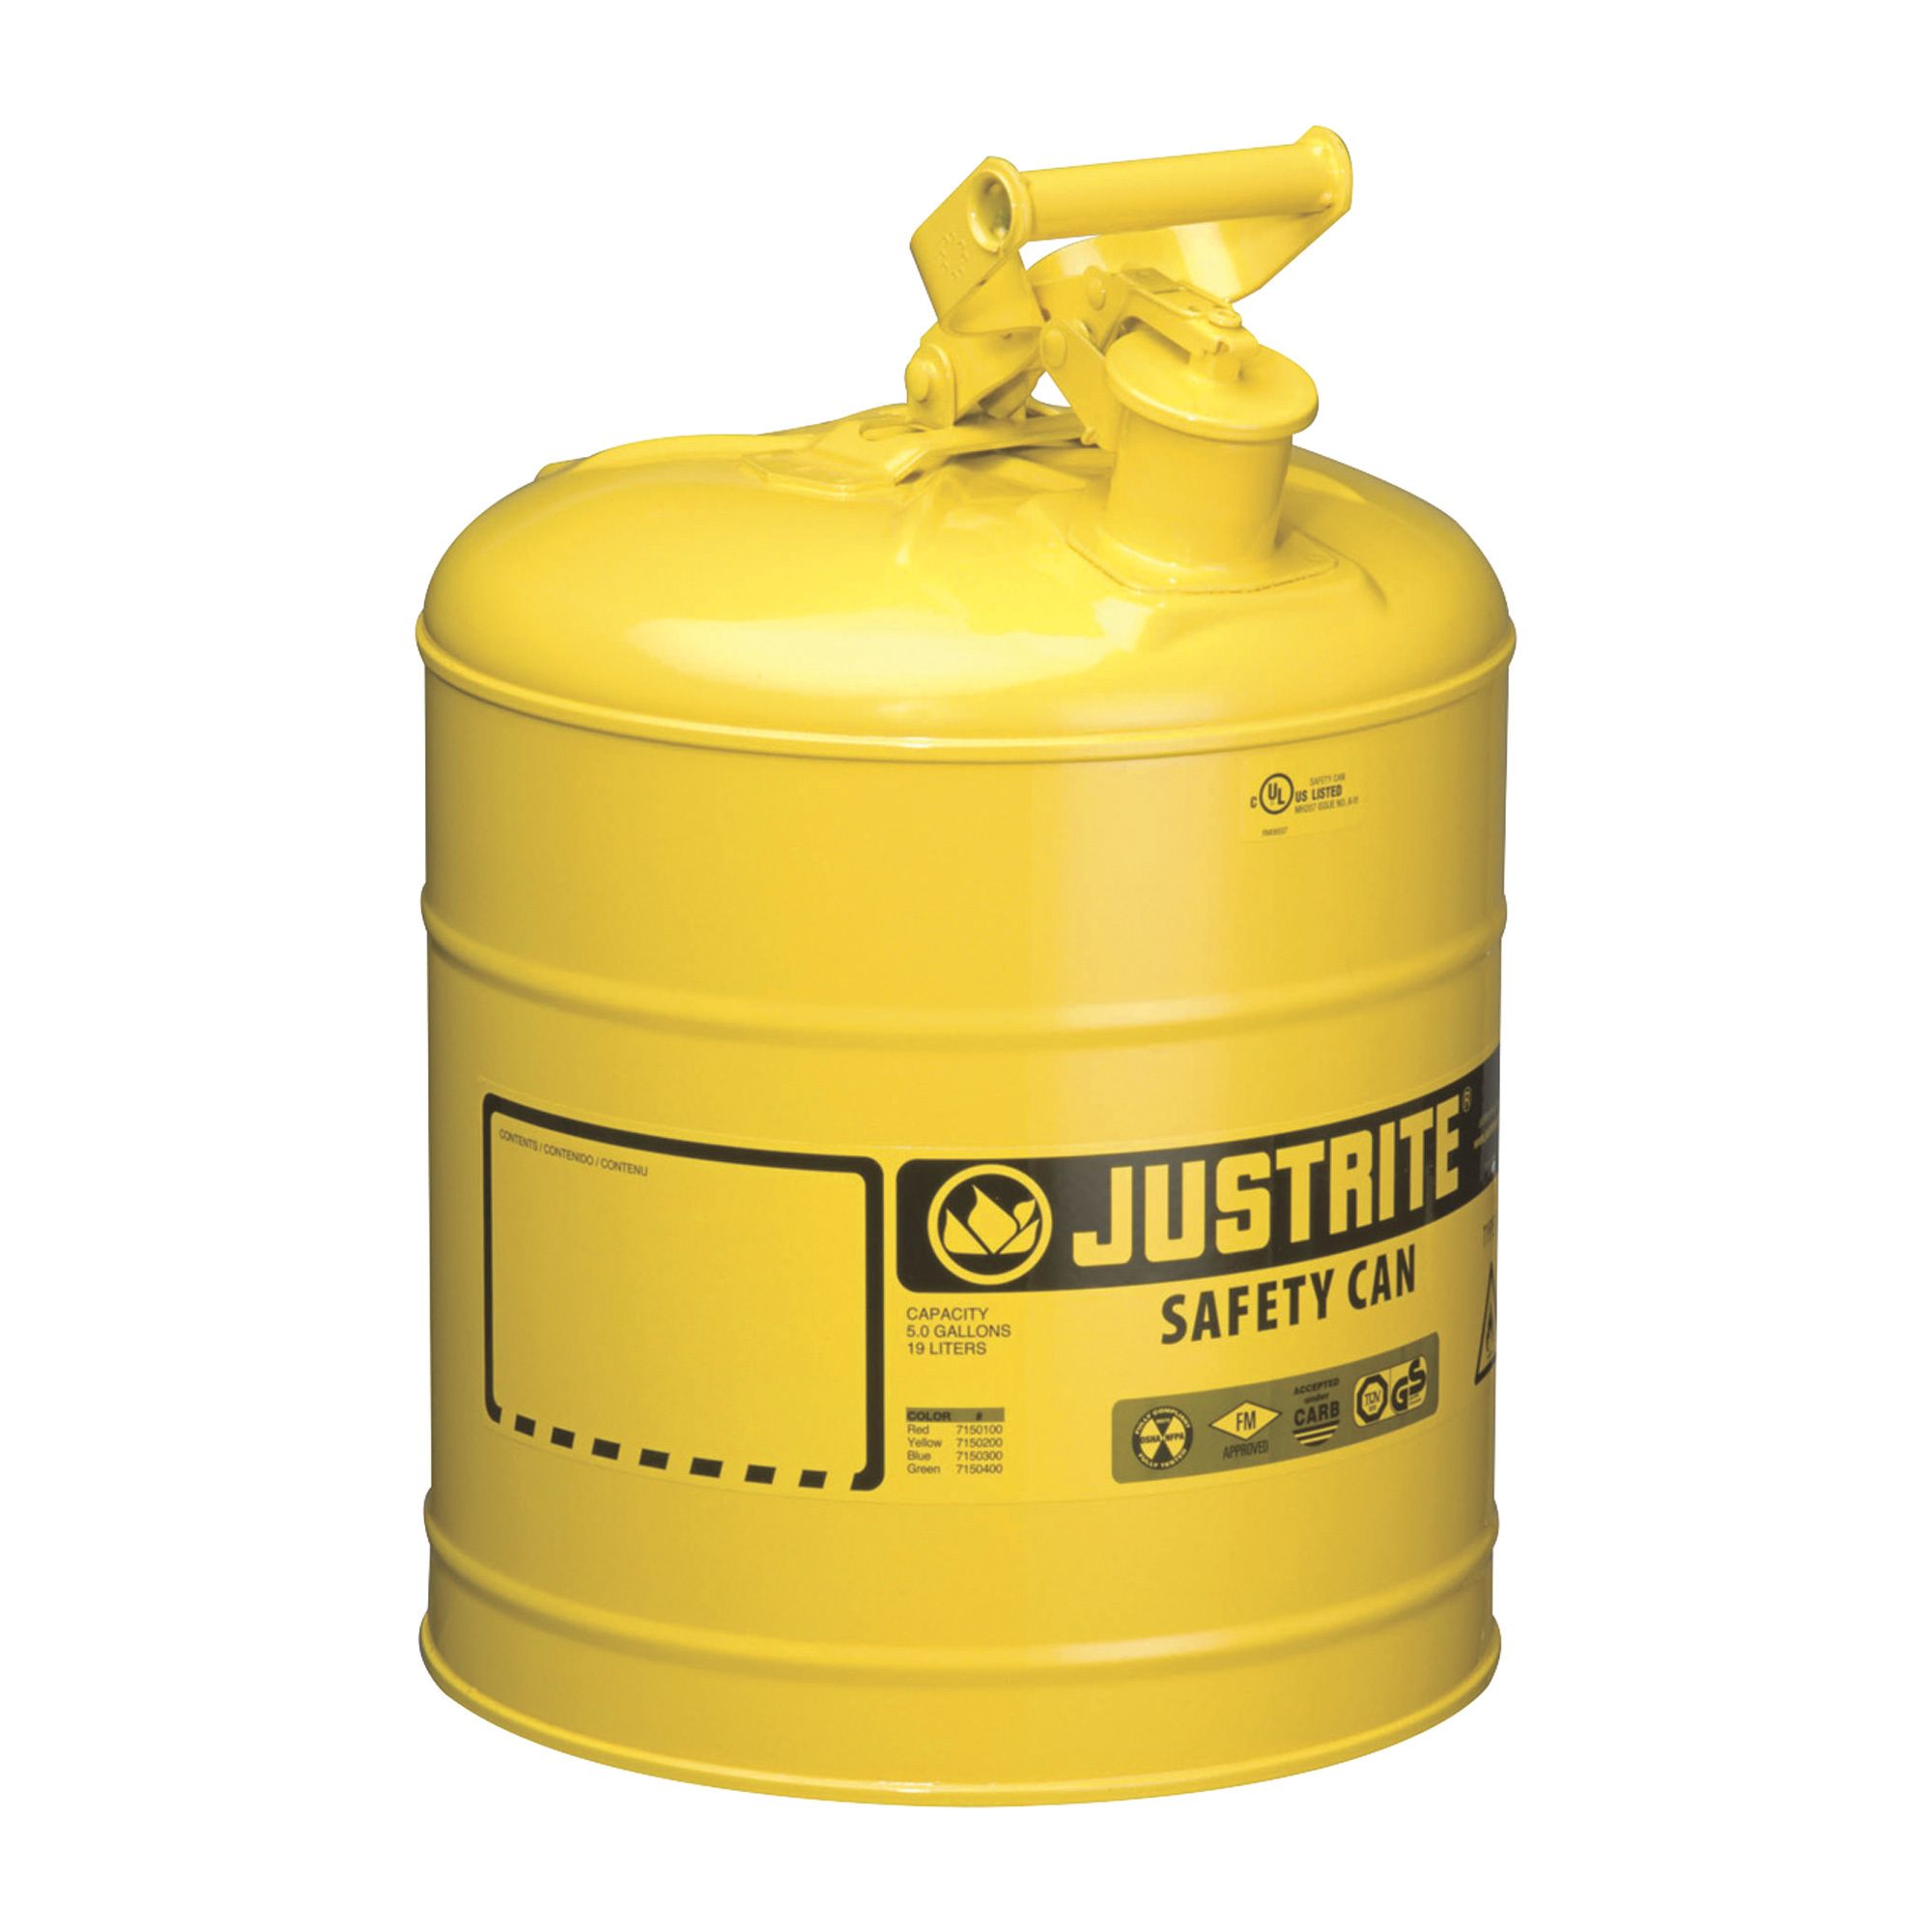 Justrite Safety Gas Can â 5-Gallon, Model 7150200